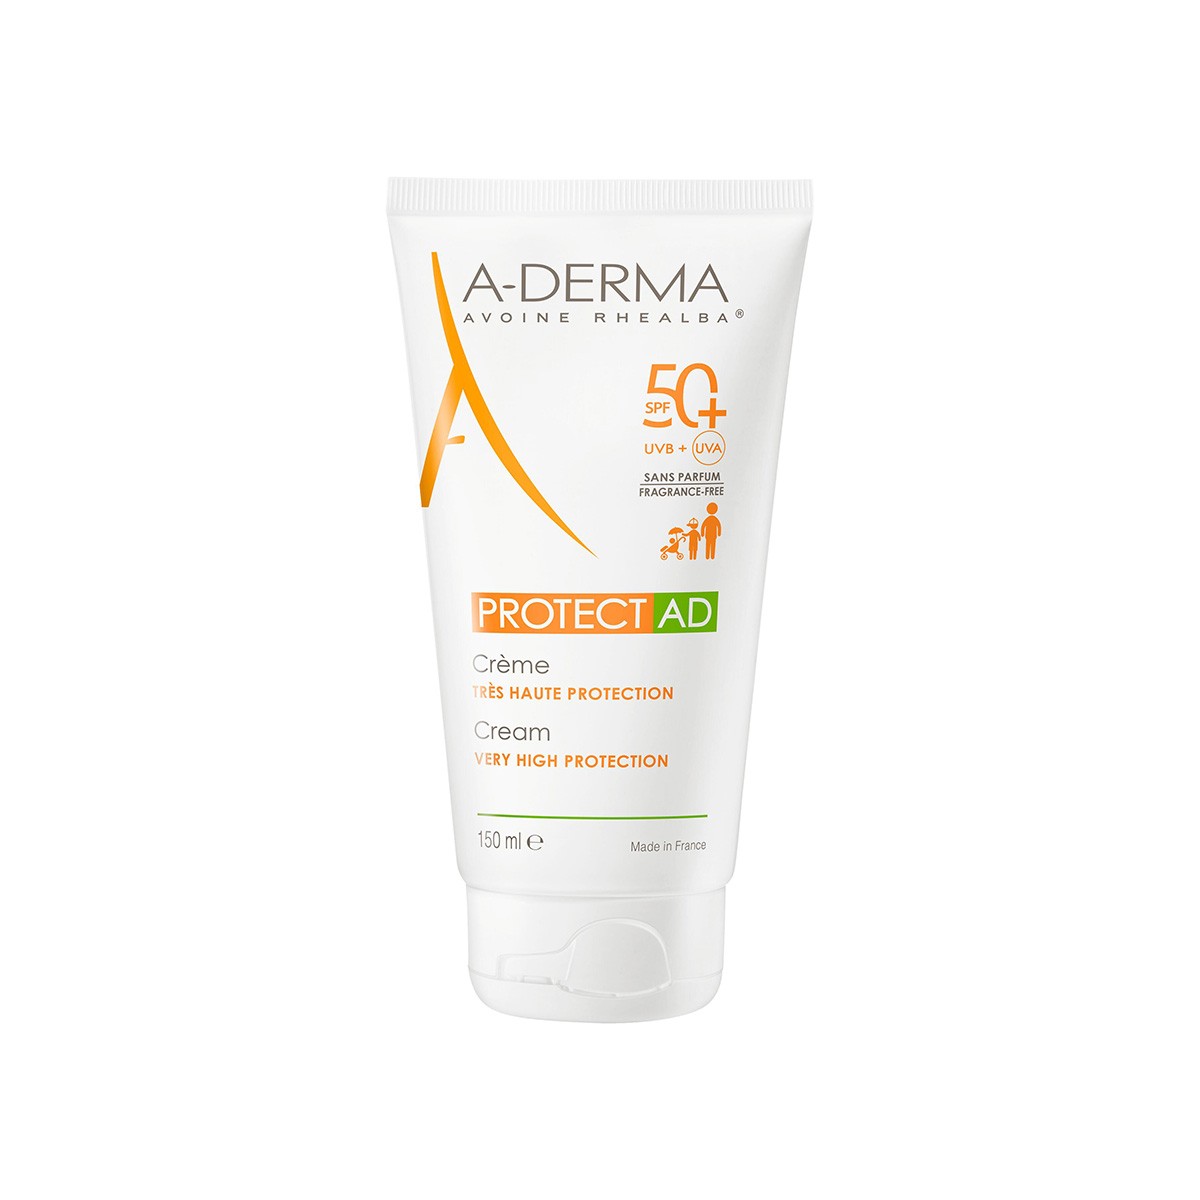 A-derma Protect AD FPS50+, 150 ml